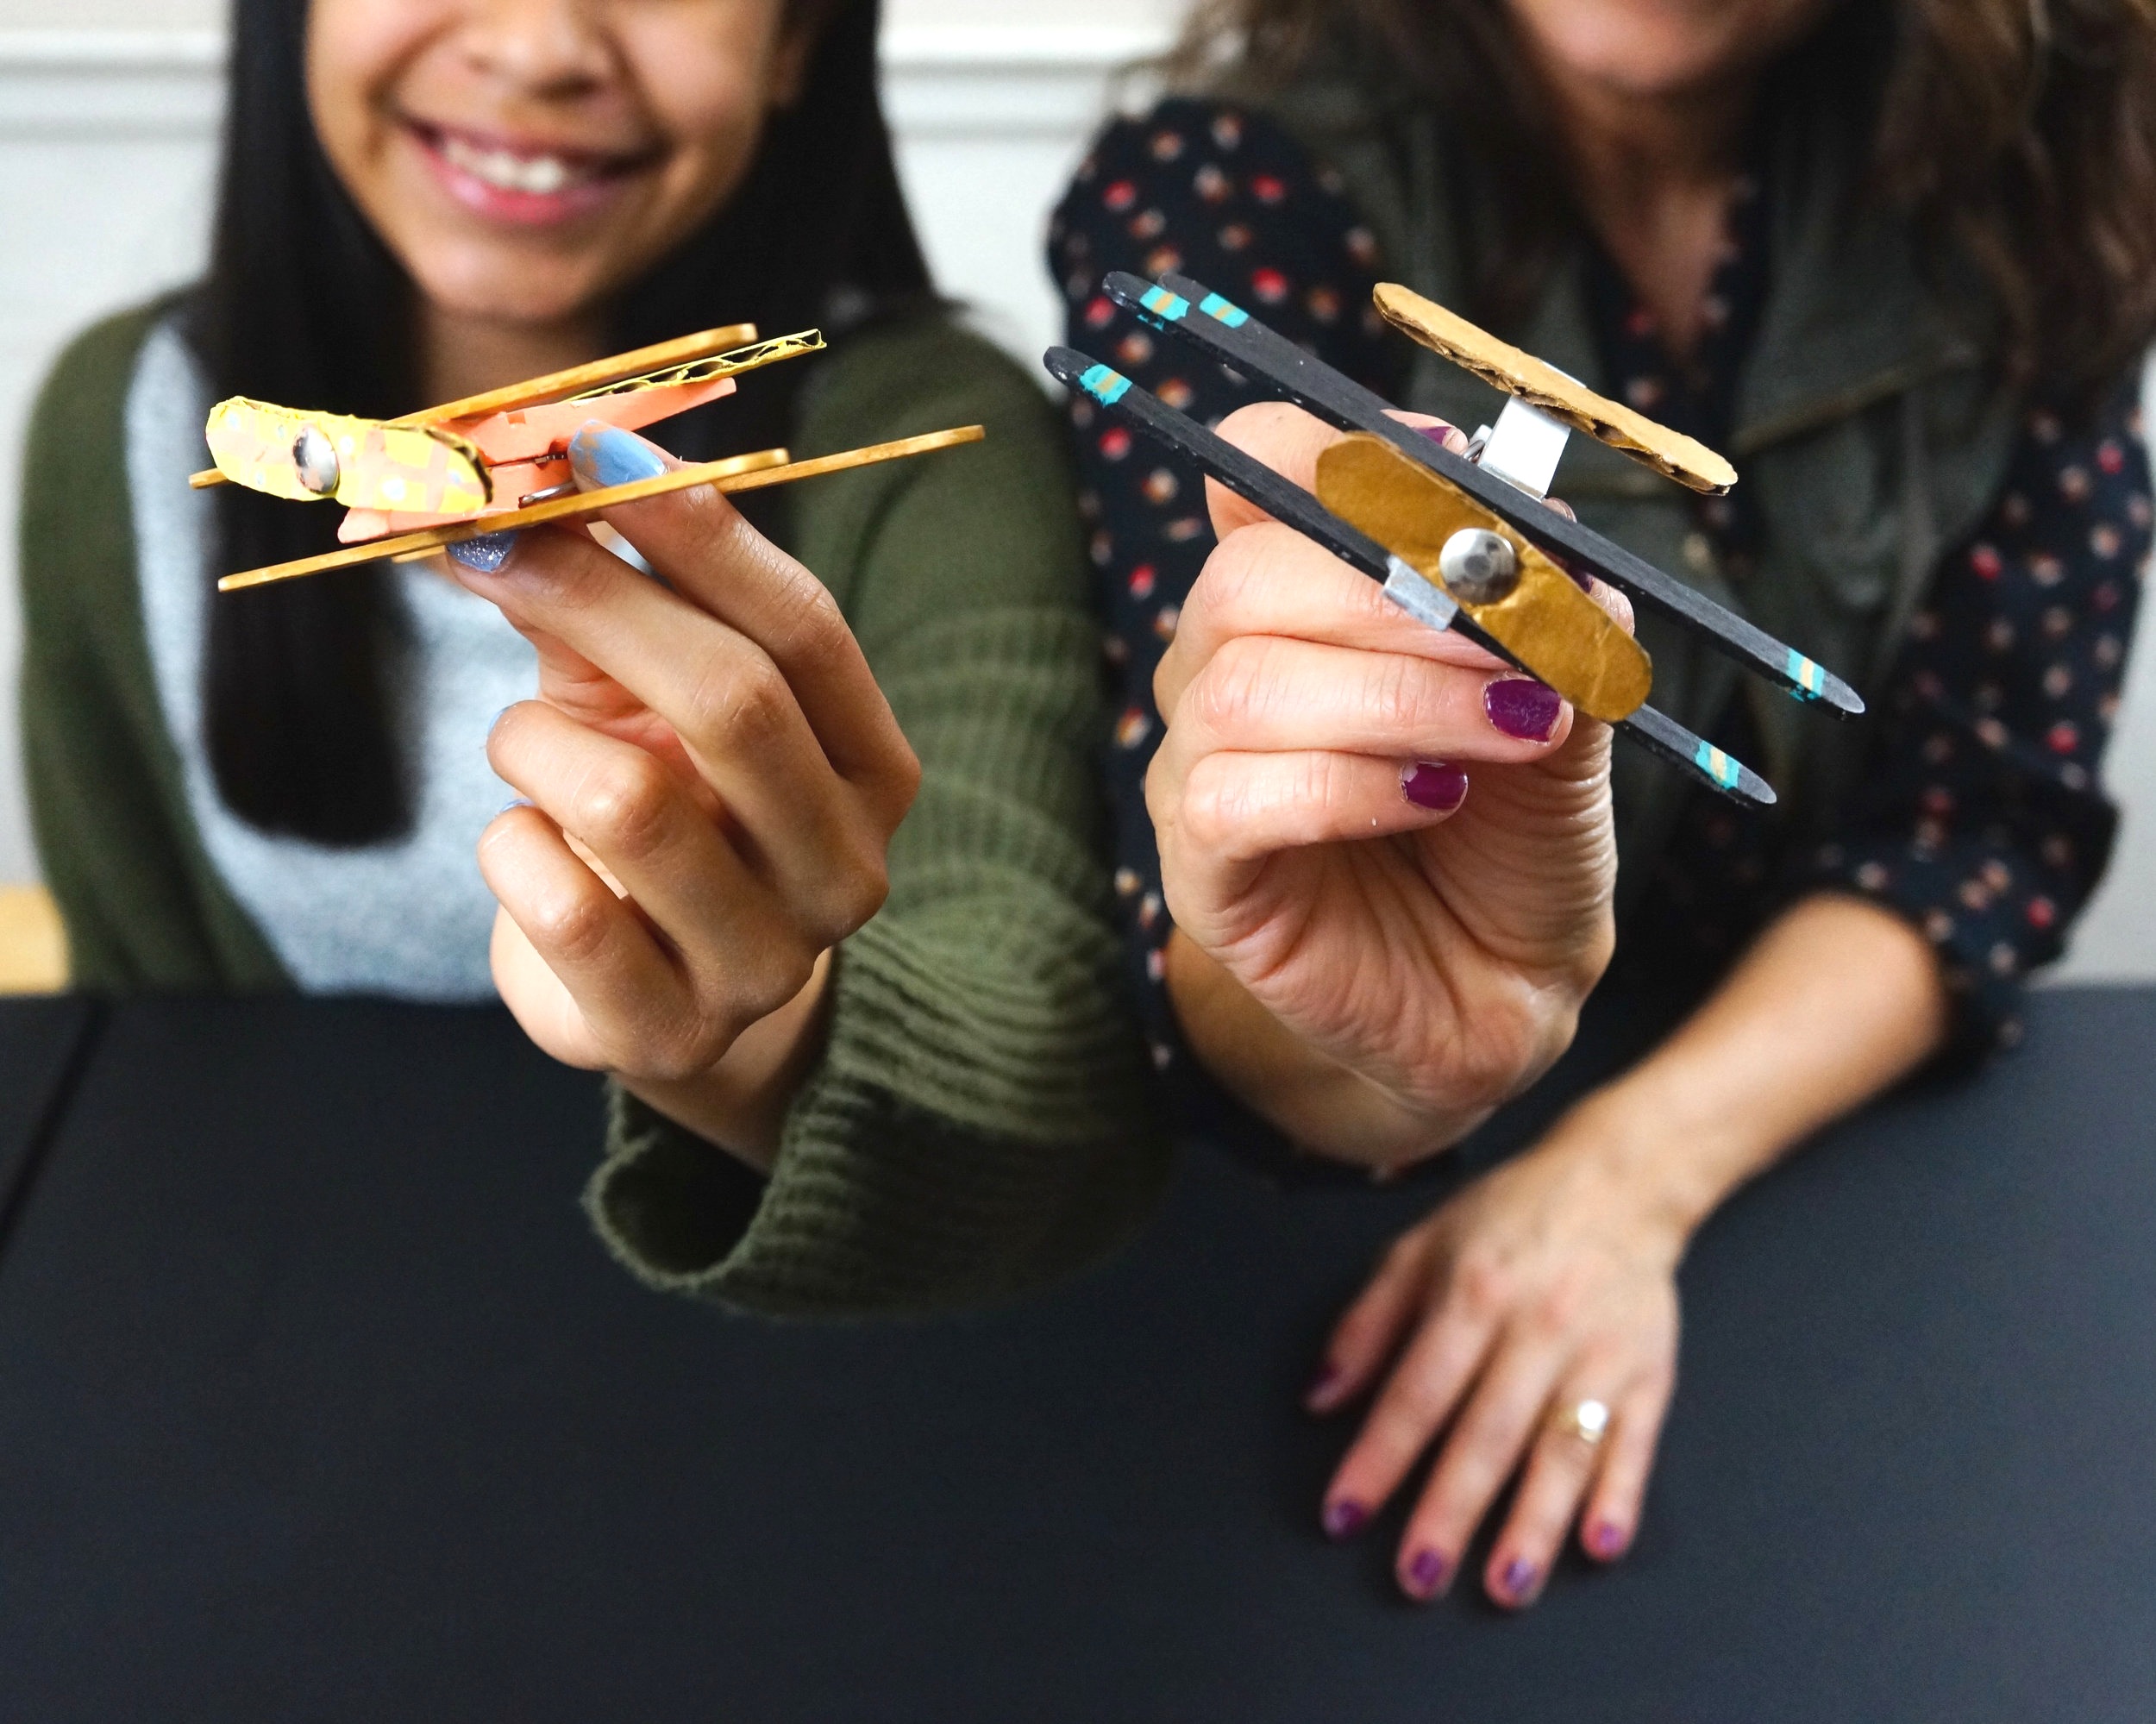  DIY Clothespin airplane, Clothespin airplane craft, Popsicle stick airplane, Craft plane, Plane with moving parts, Clothespin airplane with moving propeller, DIY spinning propeller, All About Hope projects 